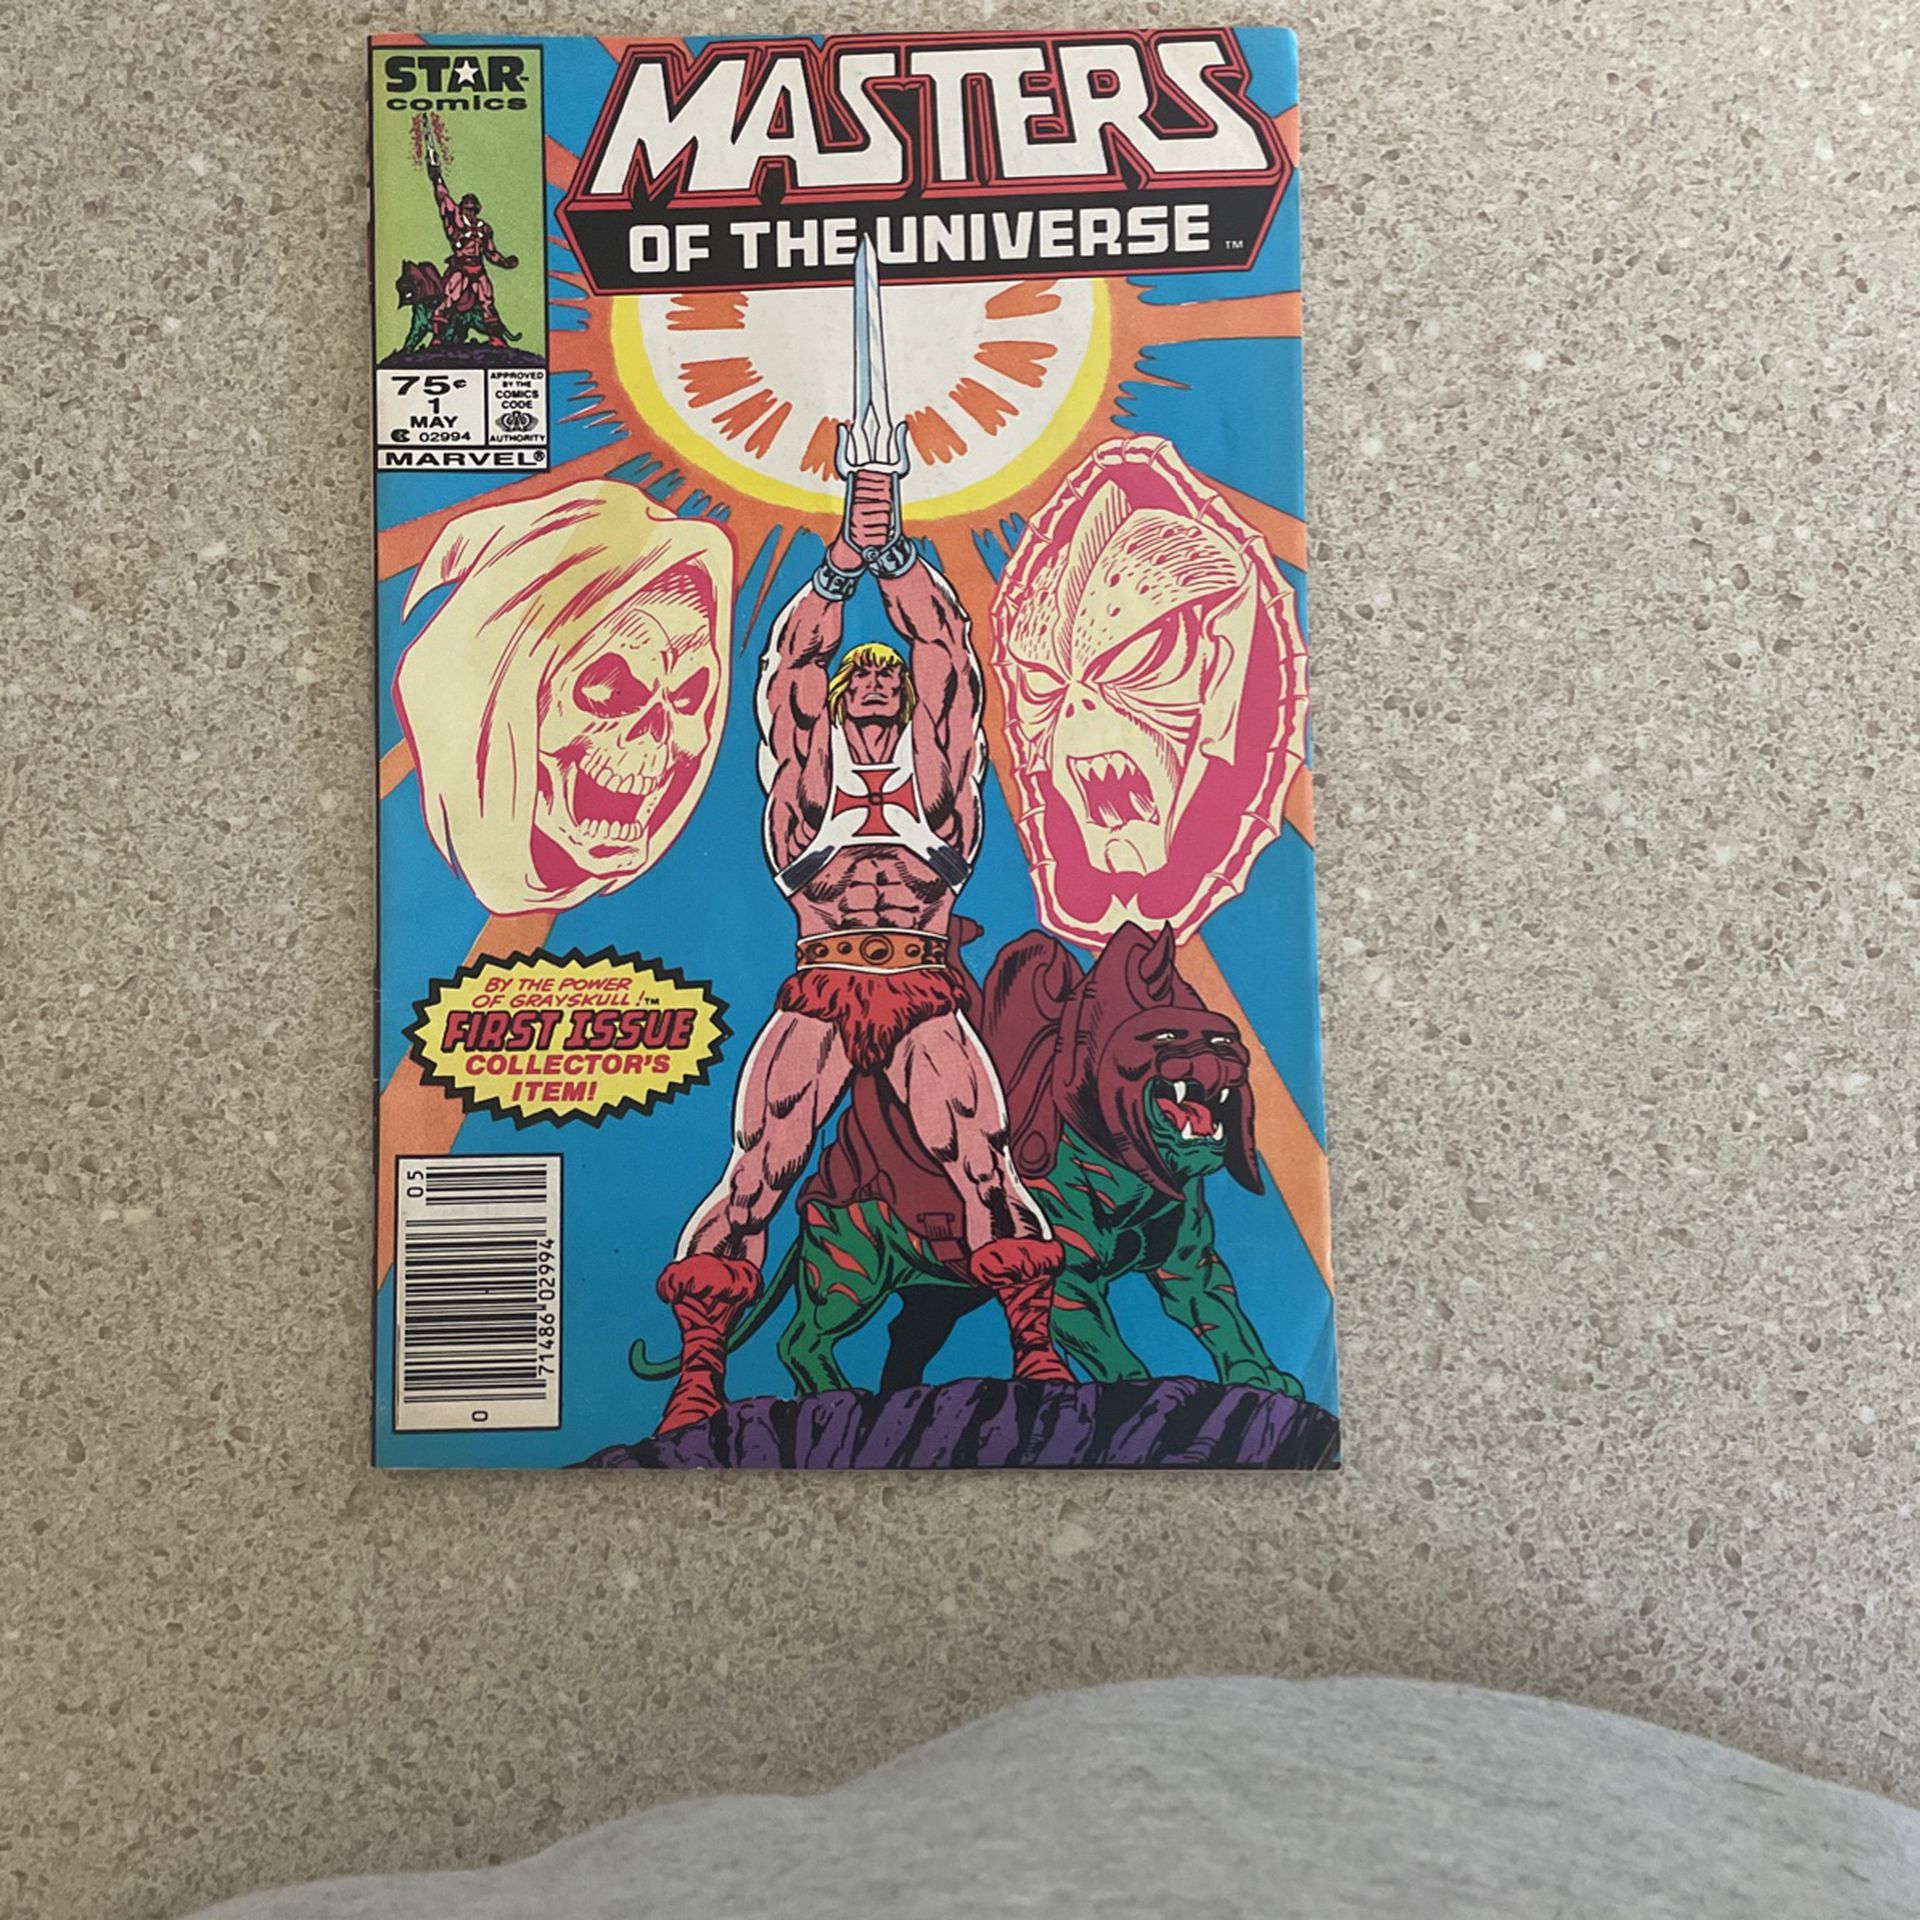 Masters Of The Universe #1 Comic, Released In 1985